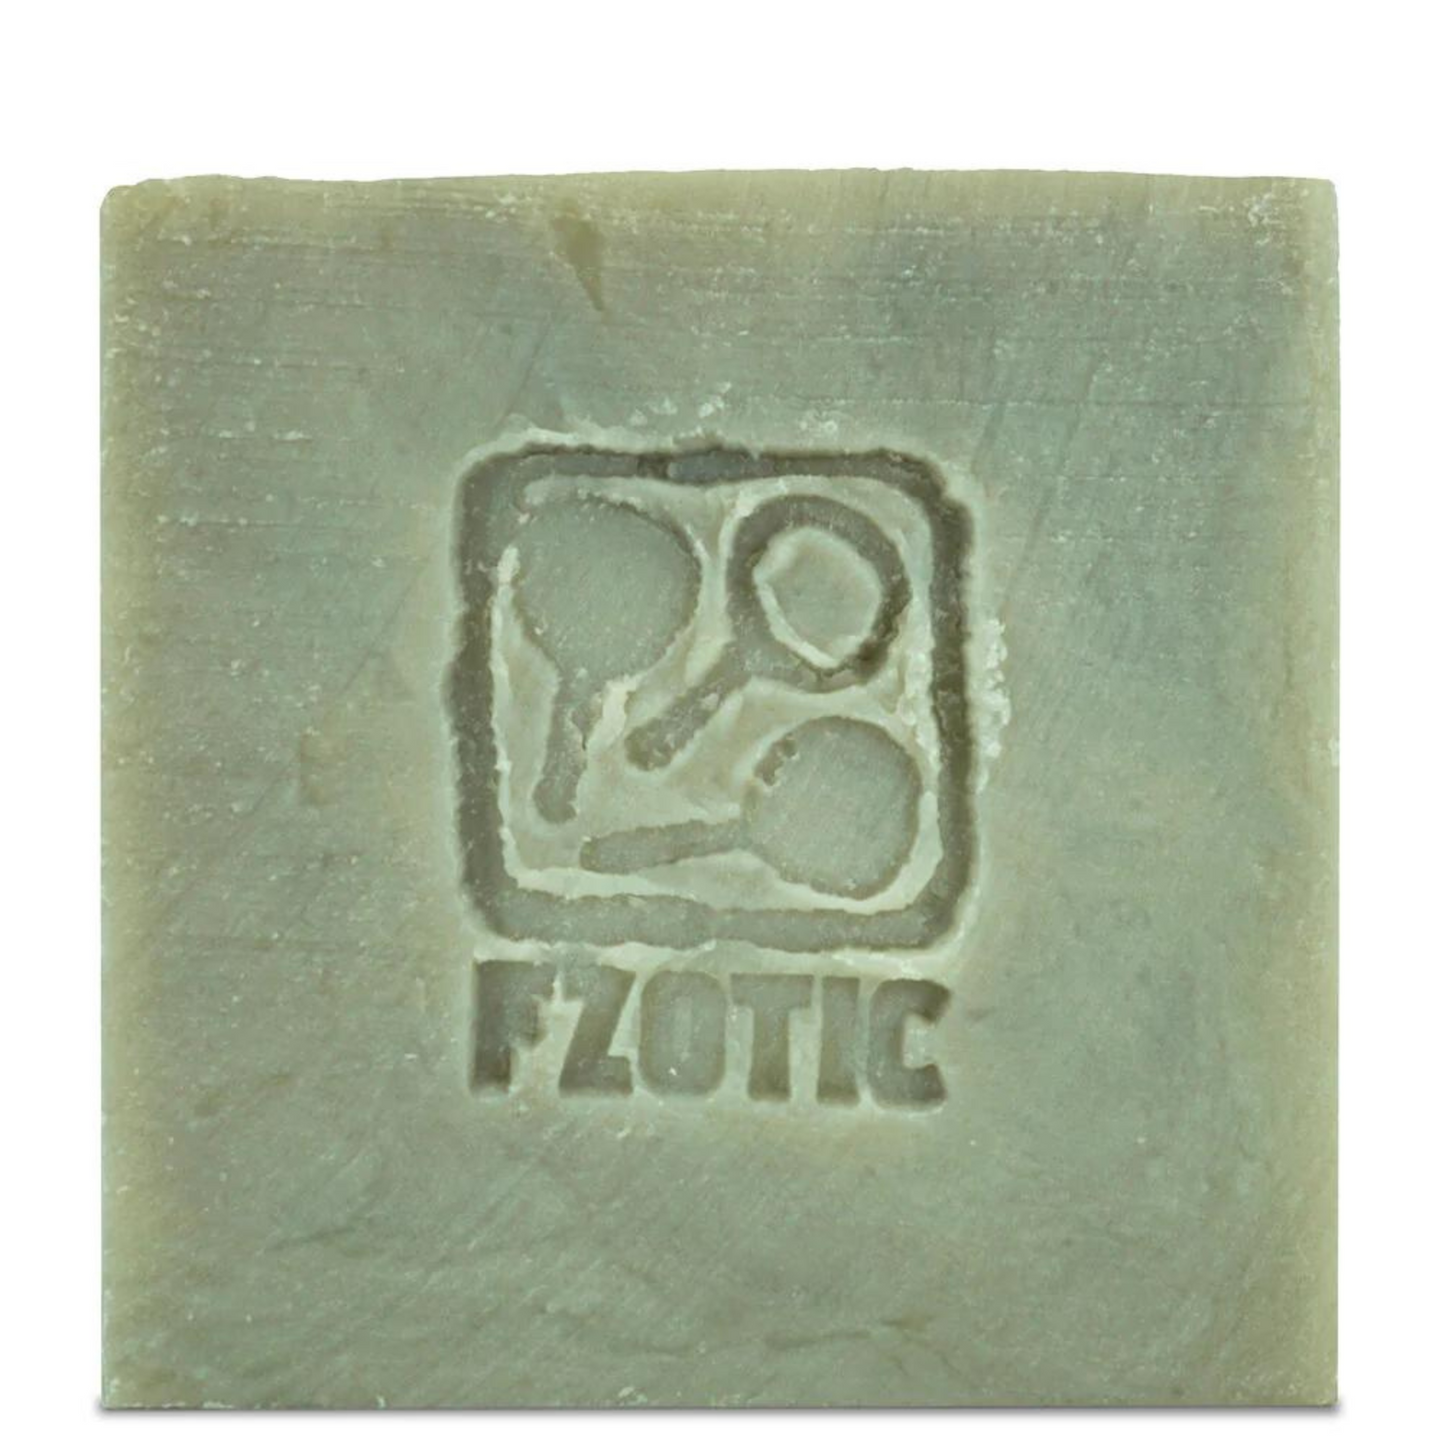 FZOTIC Toasted Lilac Soap (7 oz) #10085264